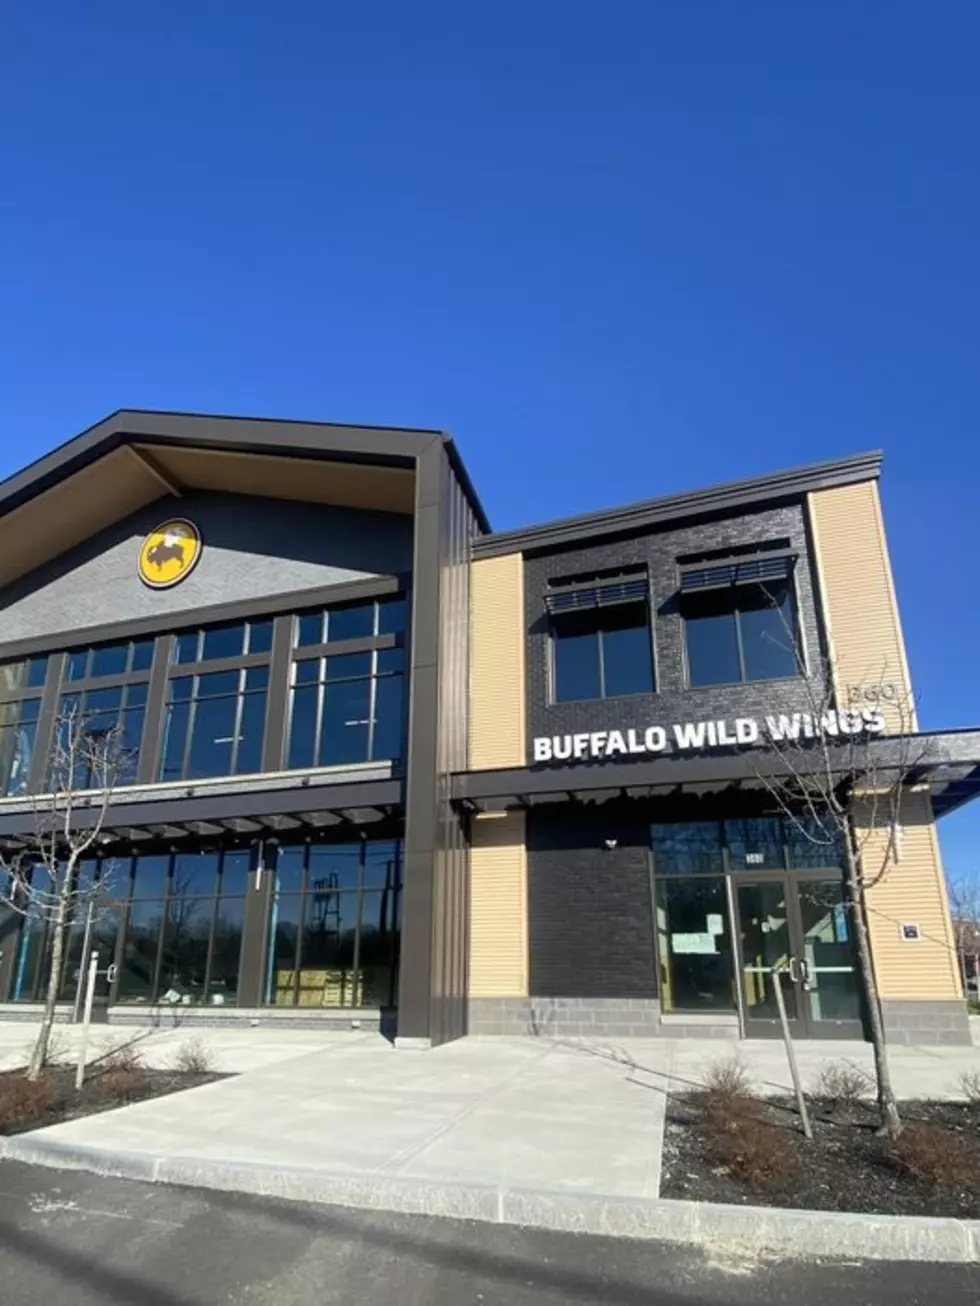 A Letter to the Owners of Buffalo Wild Wings Coming to Portsmouth, New Hampshire – West End Yards